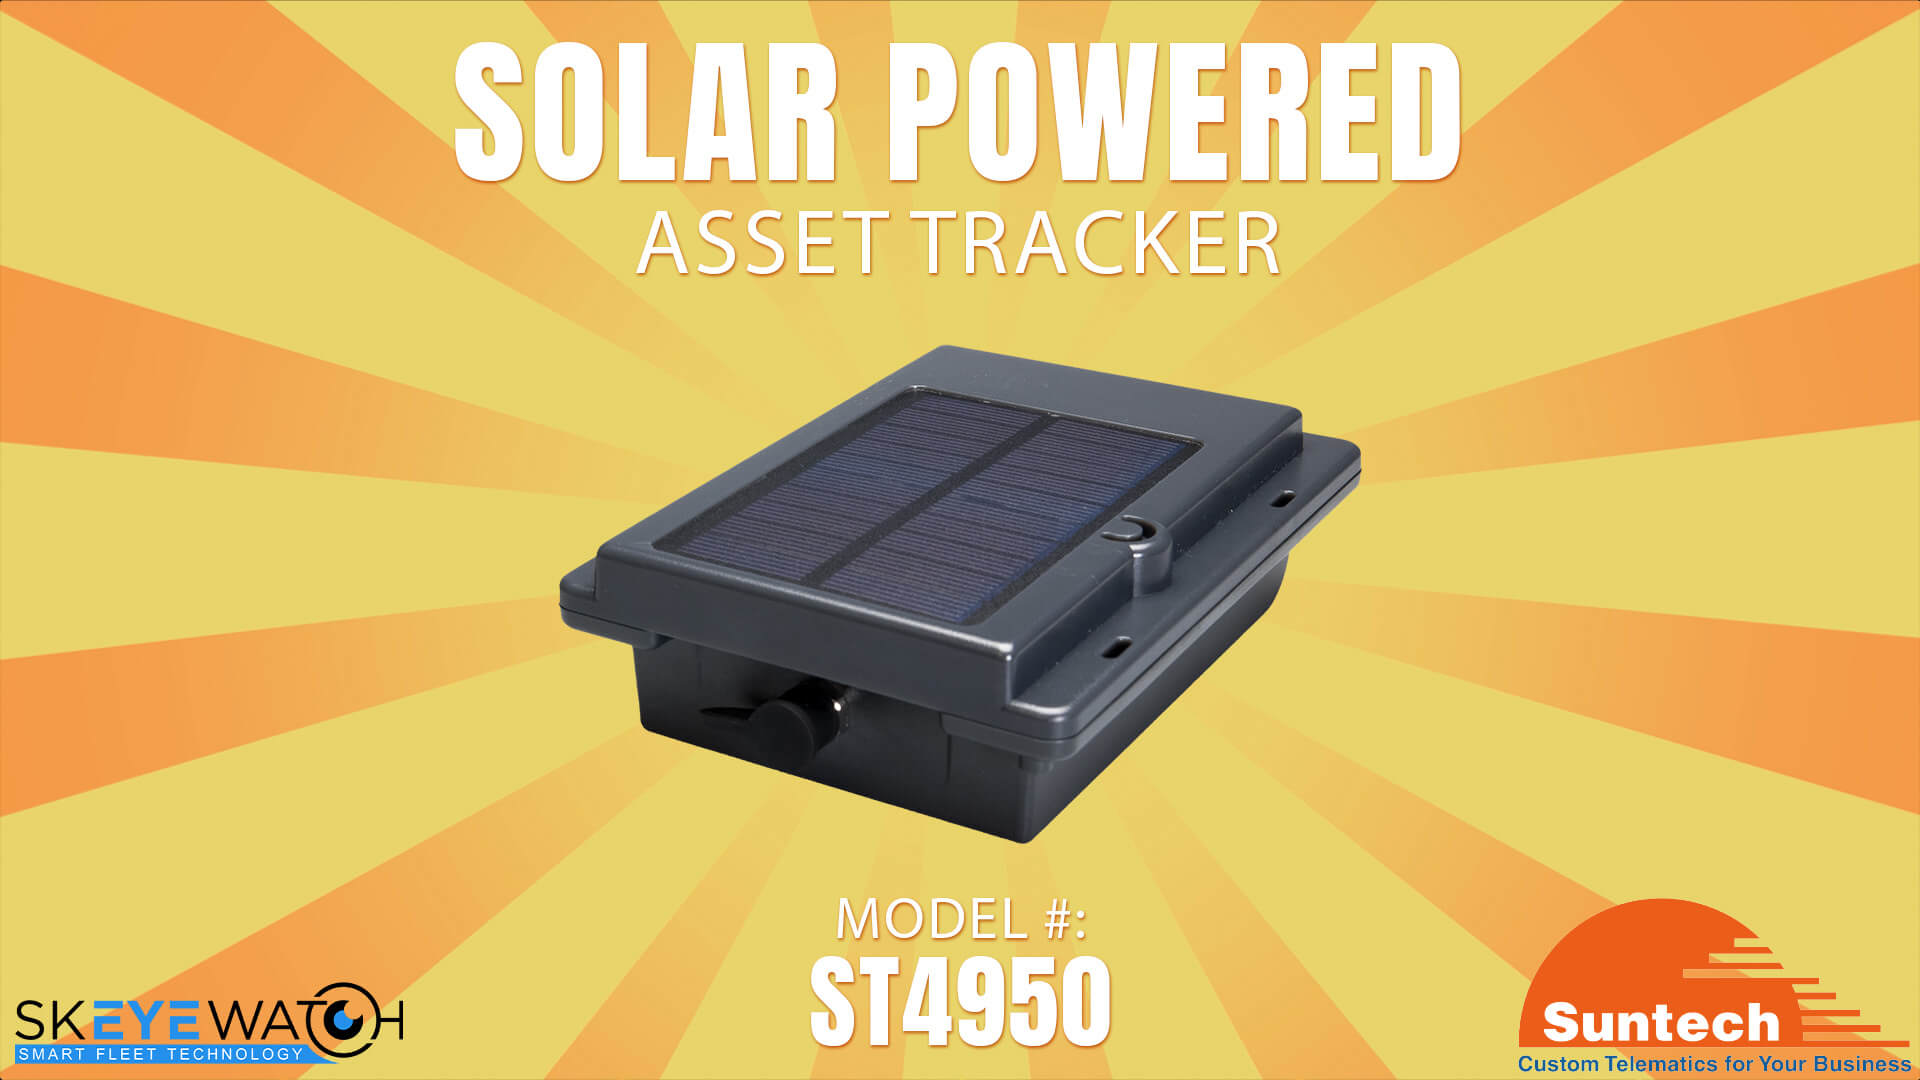 Solar Asset Tracker can cost effectively protect your fleet